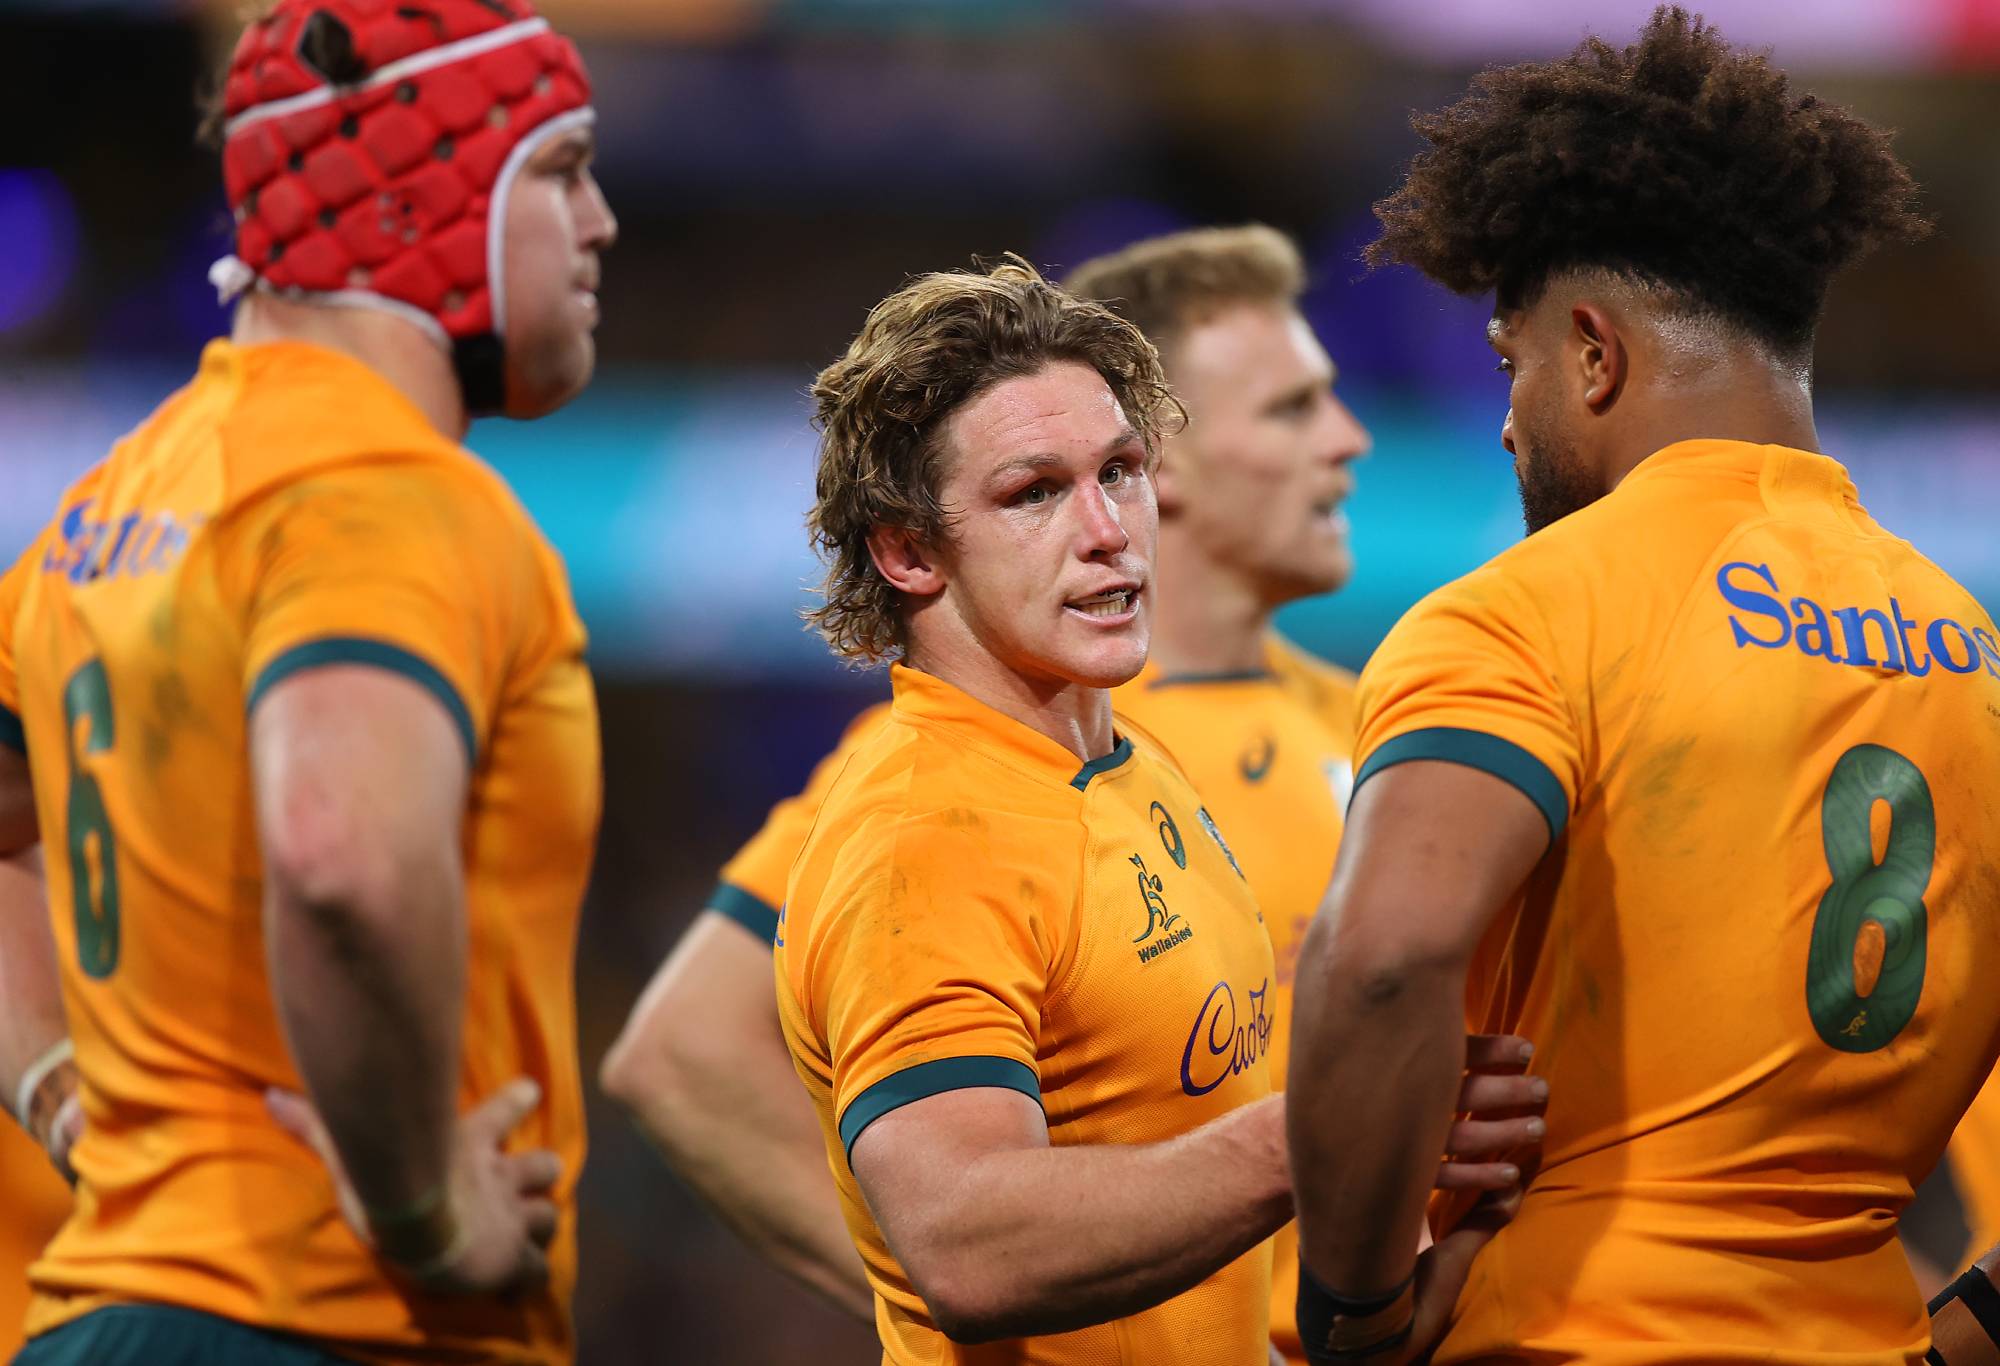 Michael Hooper of the Wallabies speaks to Rob Valetini during game three of the International Test match series between the Australia Wallabies and England at the Sydney Cricket Ground on July 16, 2022 in Sydney, Australia. (Photo by Mark Kolbe/Getty Images)